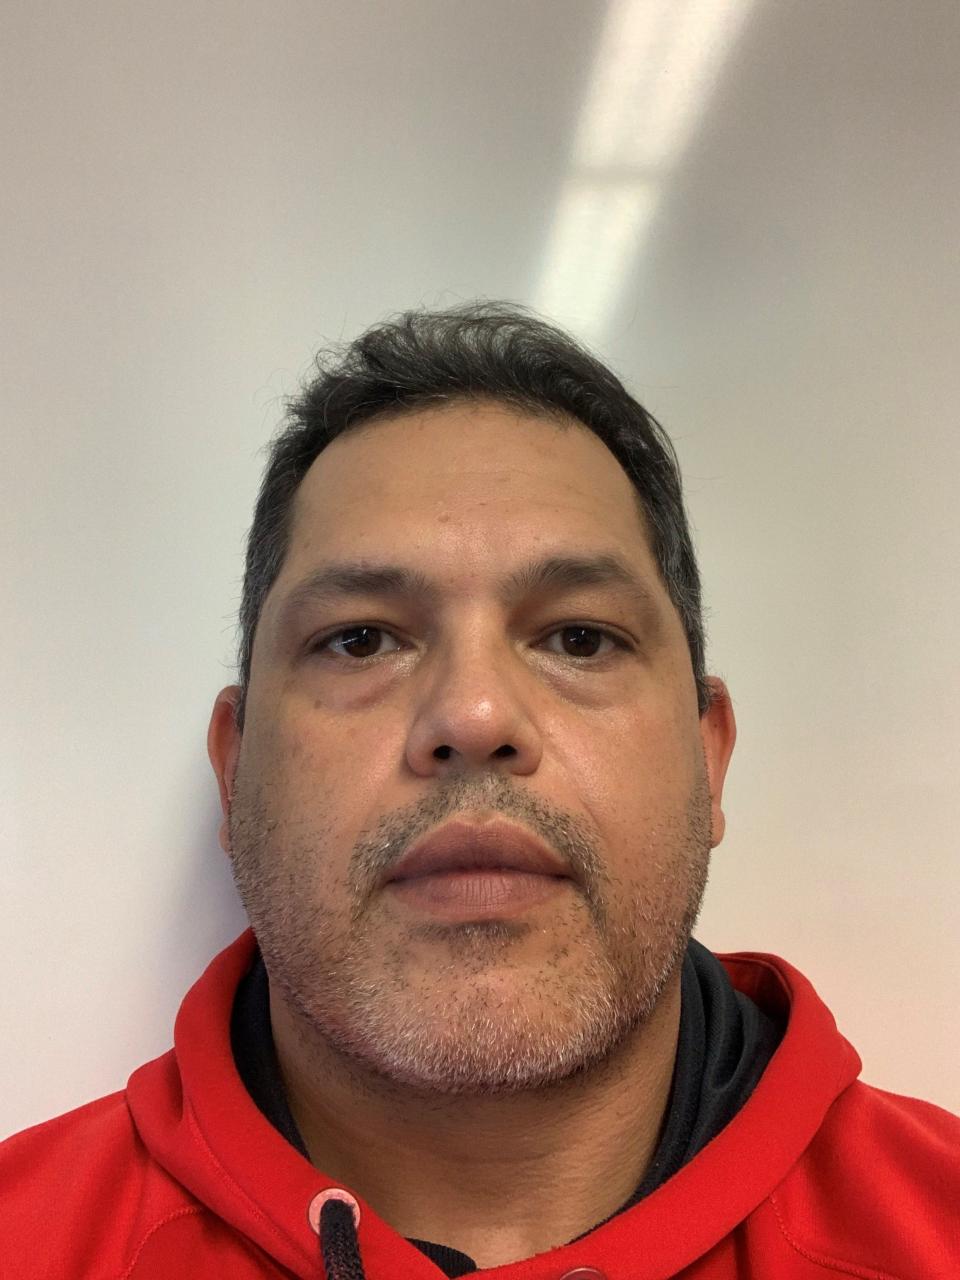 Jose Guzman was approved as the head football coach at Vineland High School on Thursday. Guzman played football at Hammonton and The College of New Jersey and has been a teacher in the Vineland School District for 22 years.